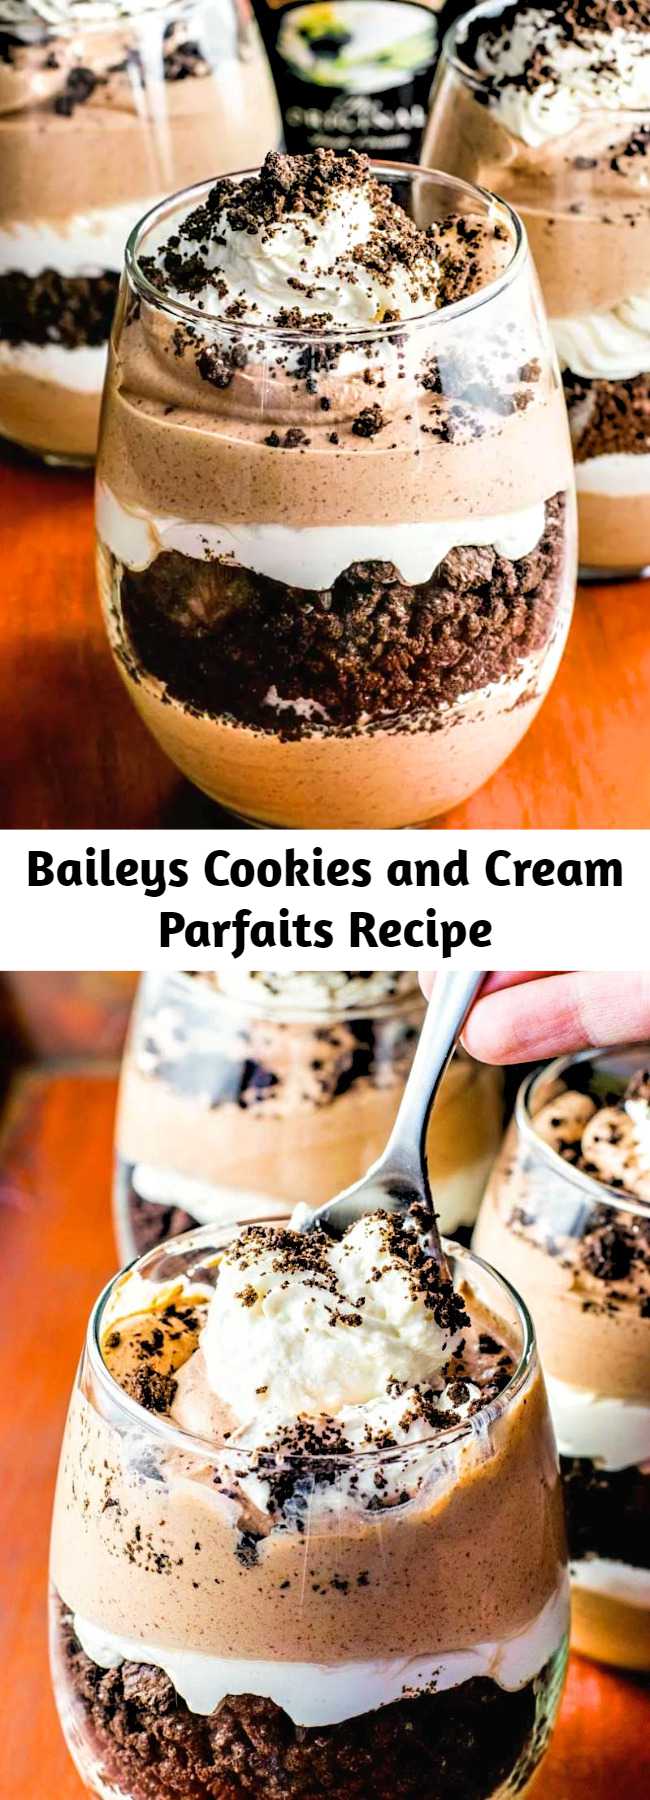 Layered chocolate and Baileys cream paired with crumbled Oreo cookies. This delicious Baileys parfait is the perfect weekend retreat!